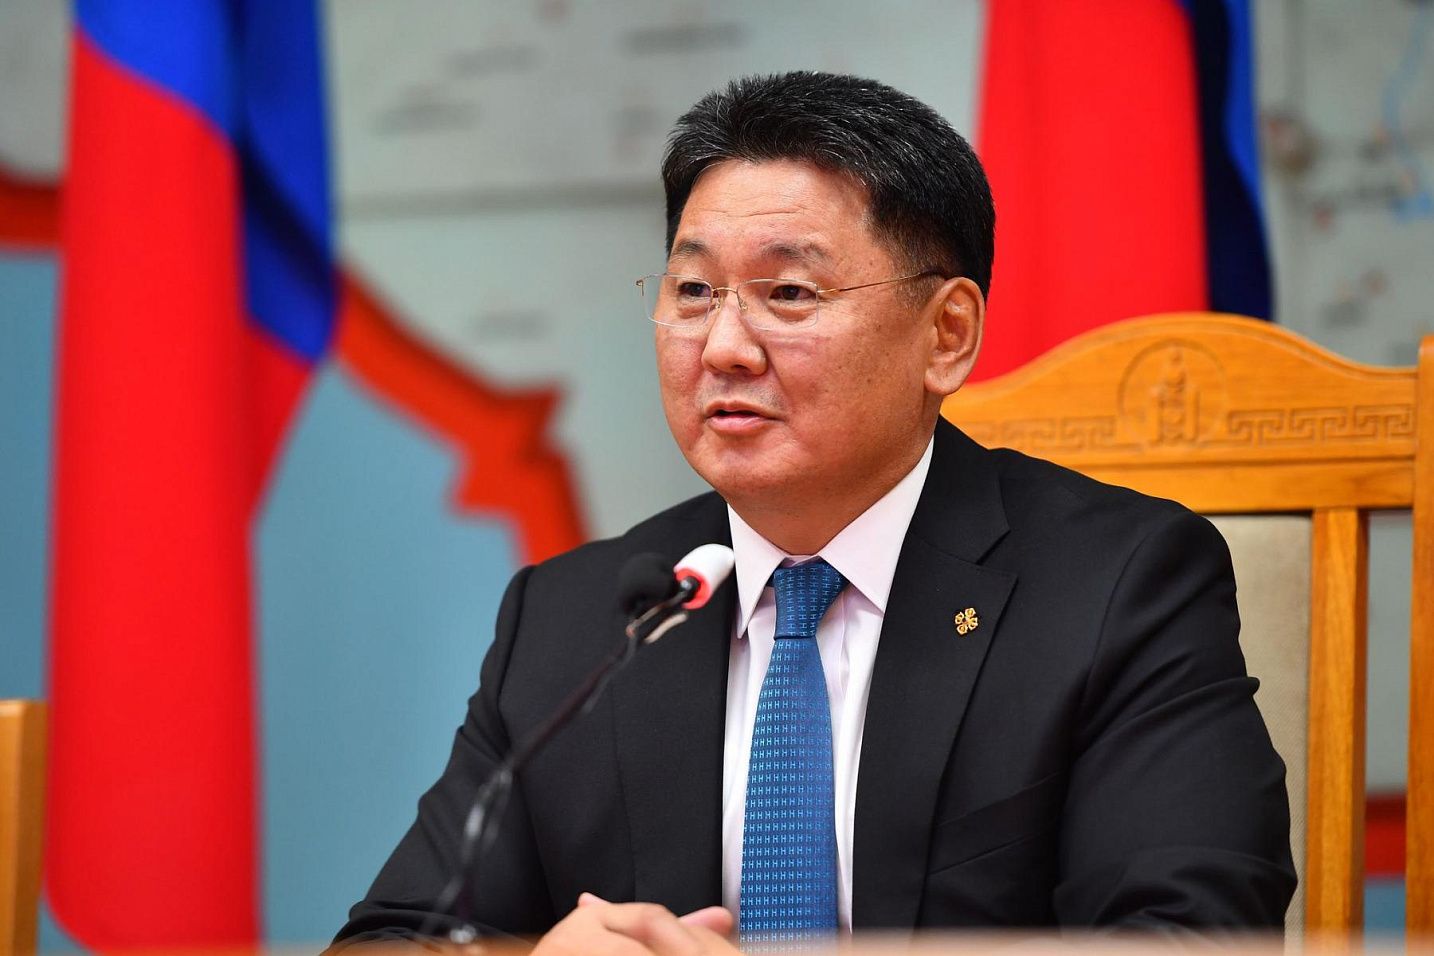 President of Mongolia sends letter to President Ilham Aliyev on occasion of May 28 - Independence Day